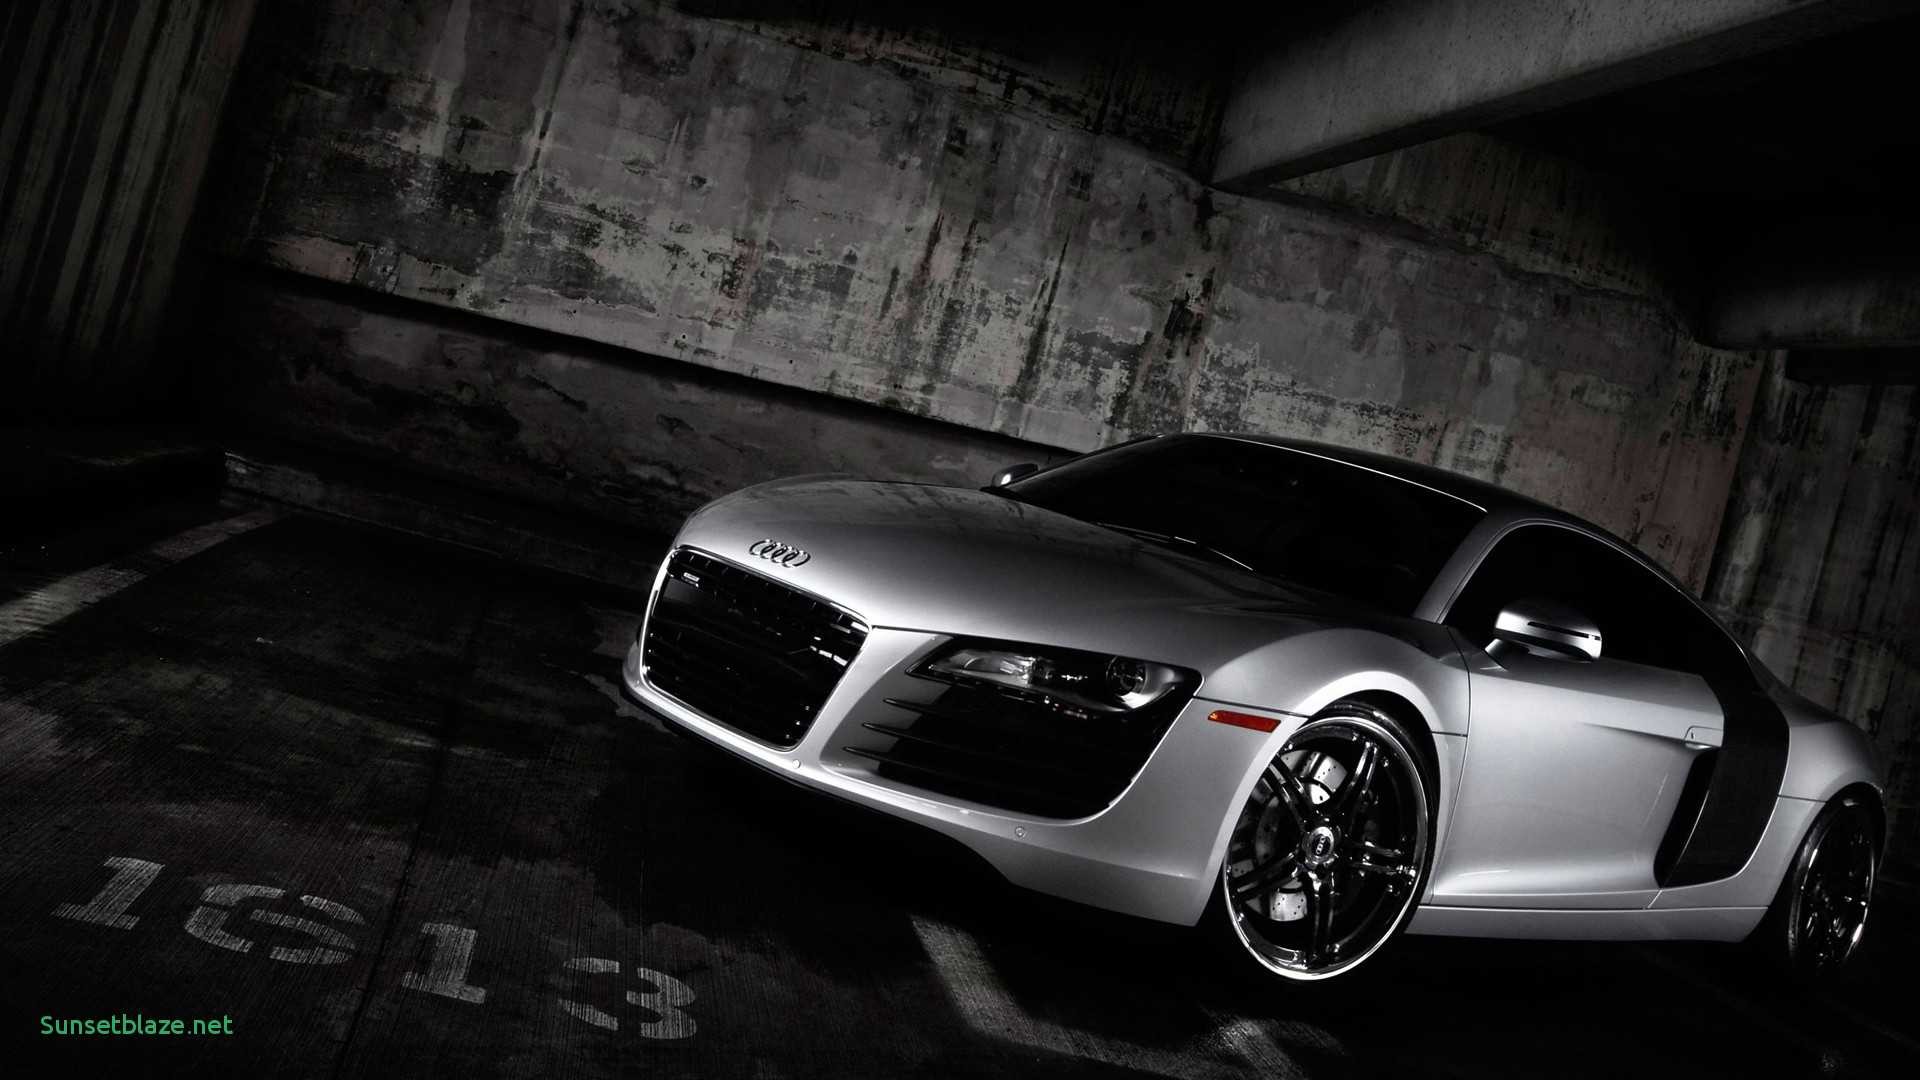 1920x1080 Car Desktop Backgrounds Group 85 Awesome Of Hd Car Wallpapers 1080p Windows  7